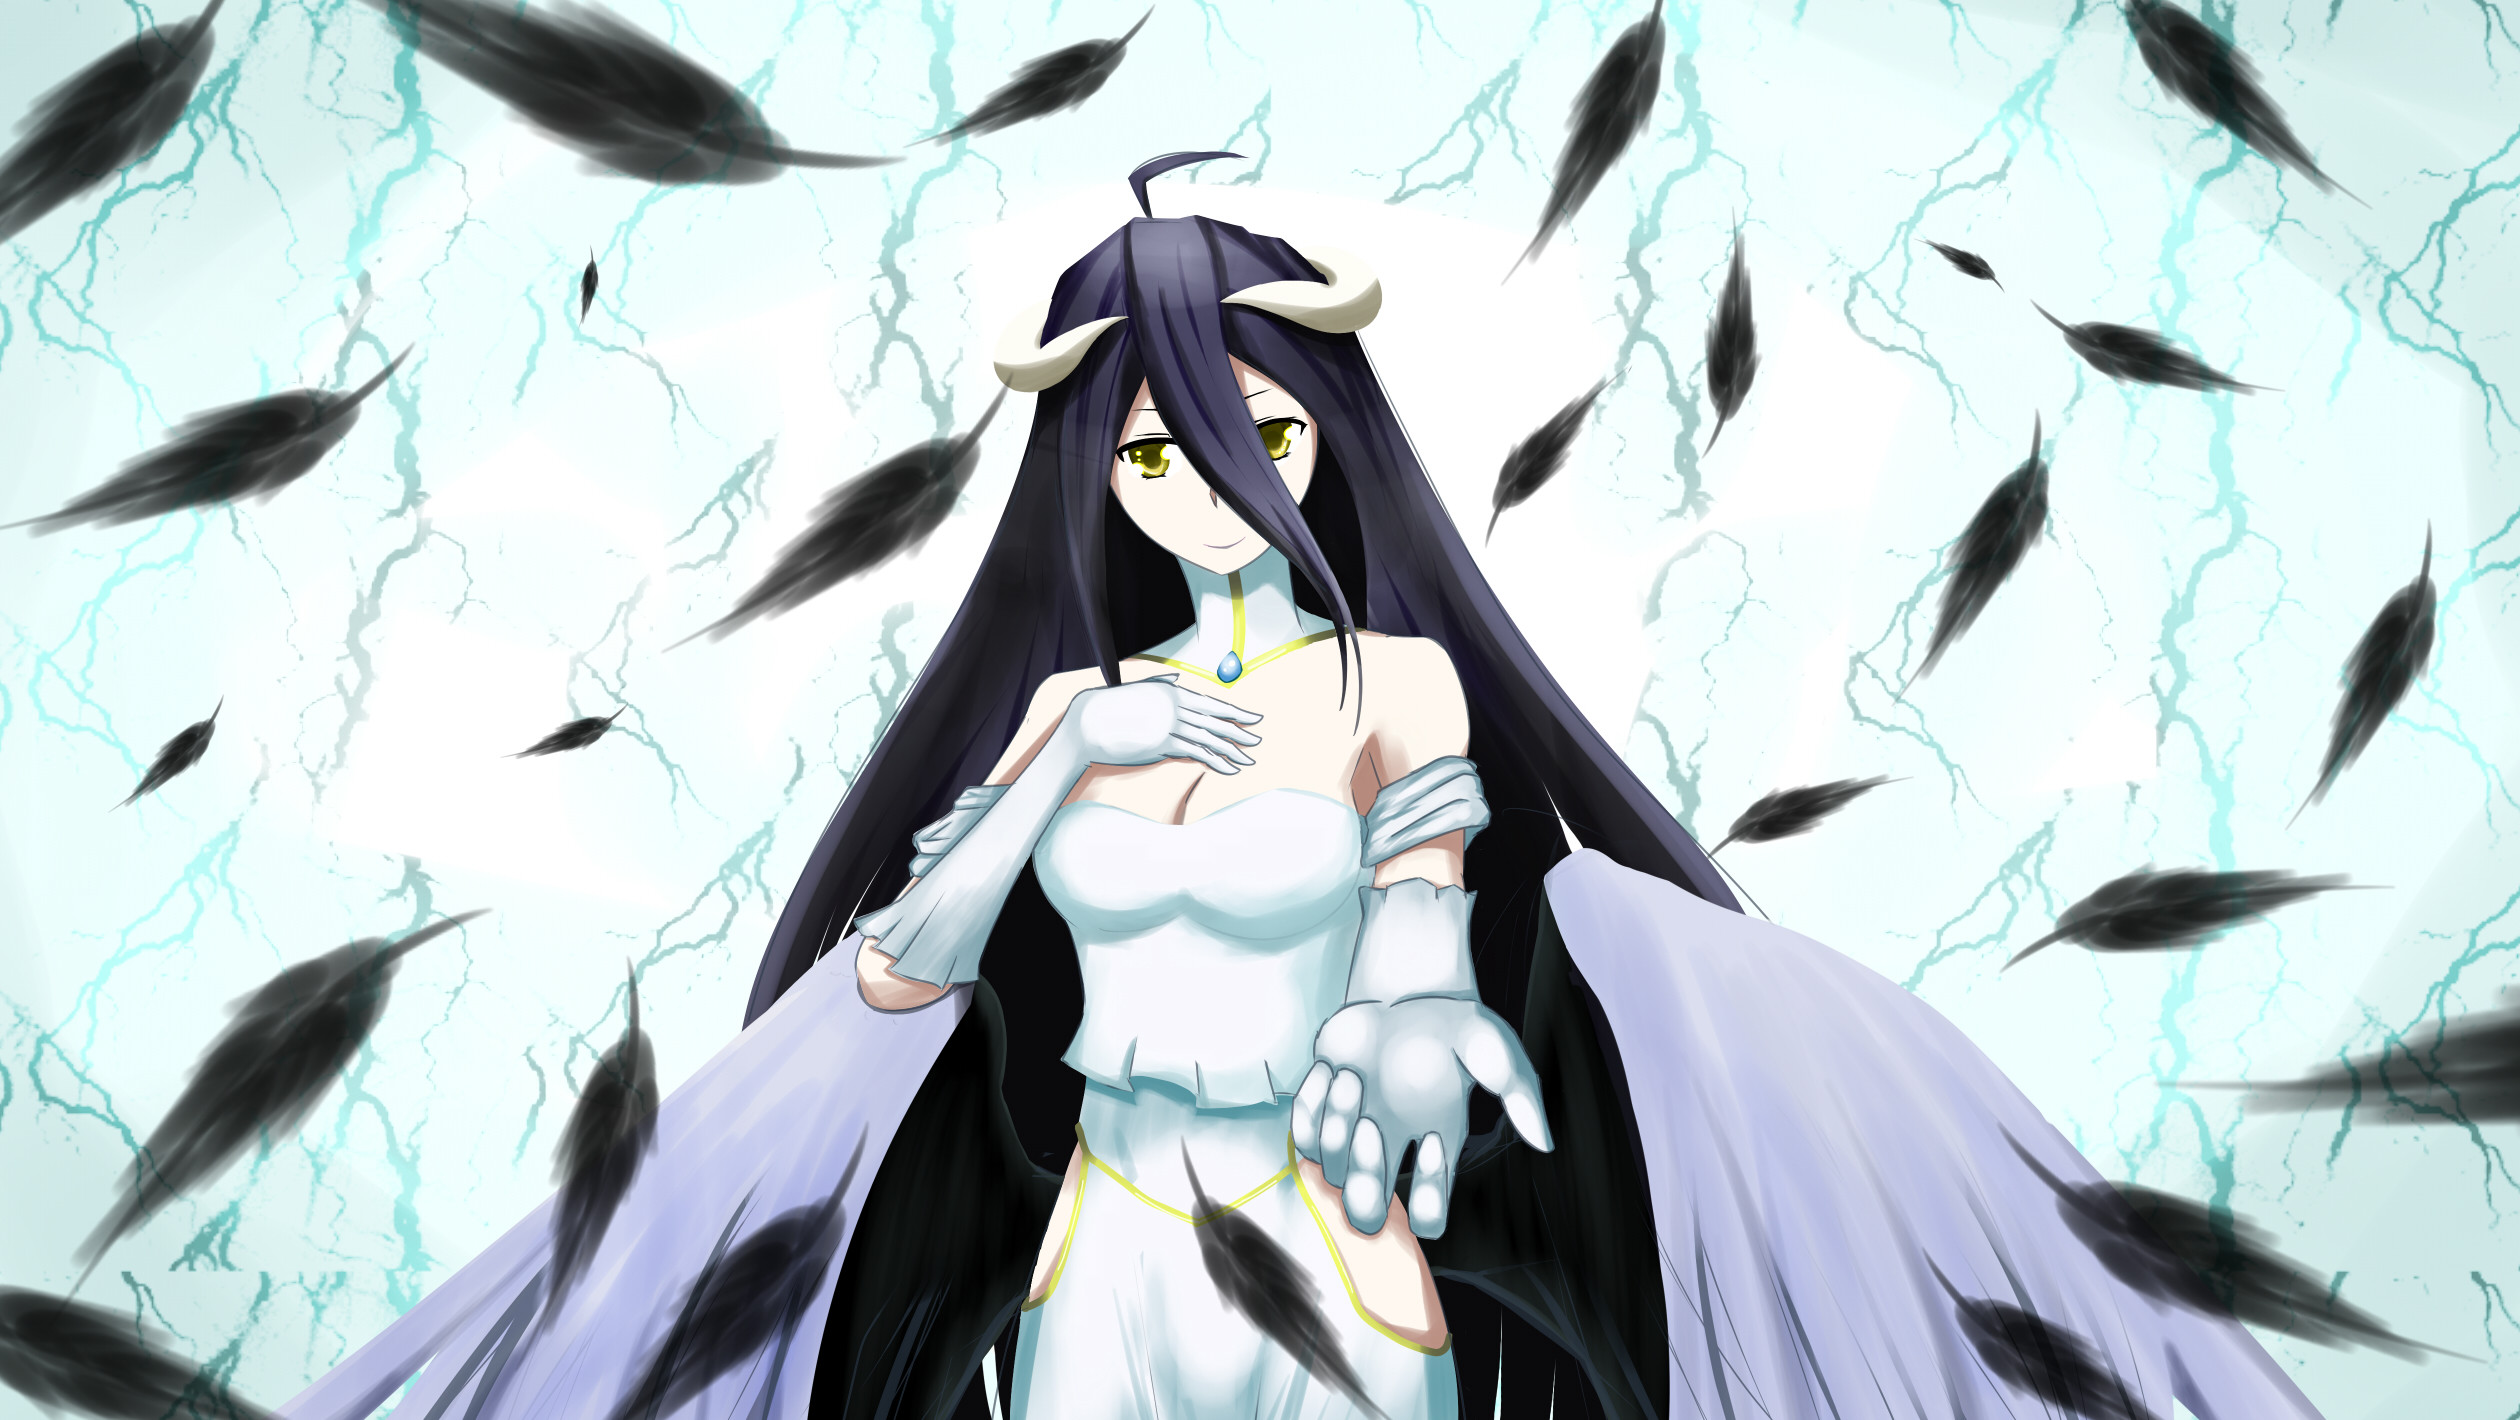 2520x1420 ... Overlord- Albedo by 1-4-2